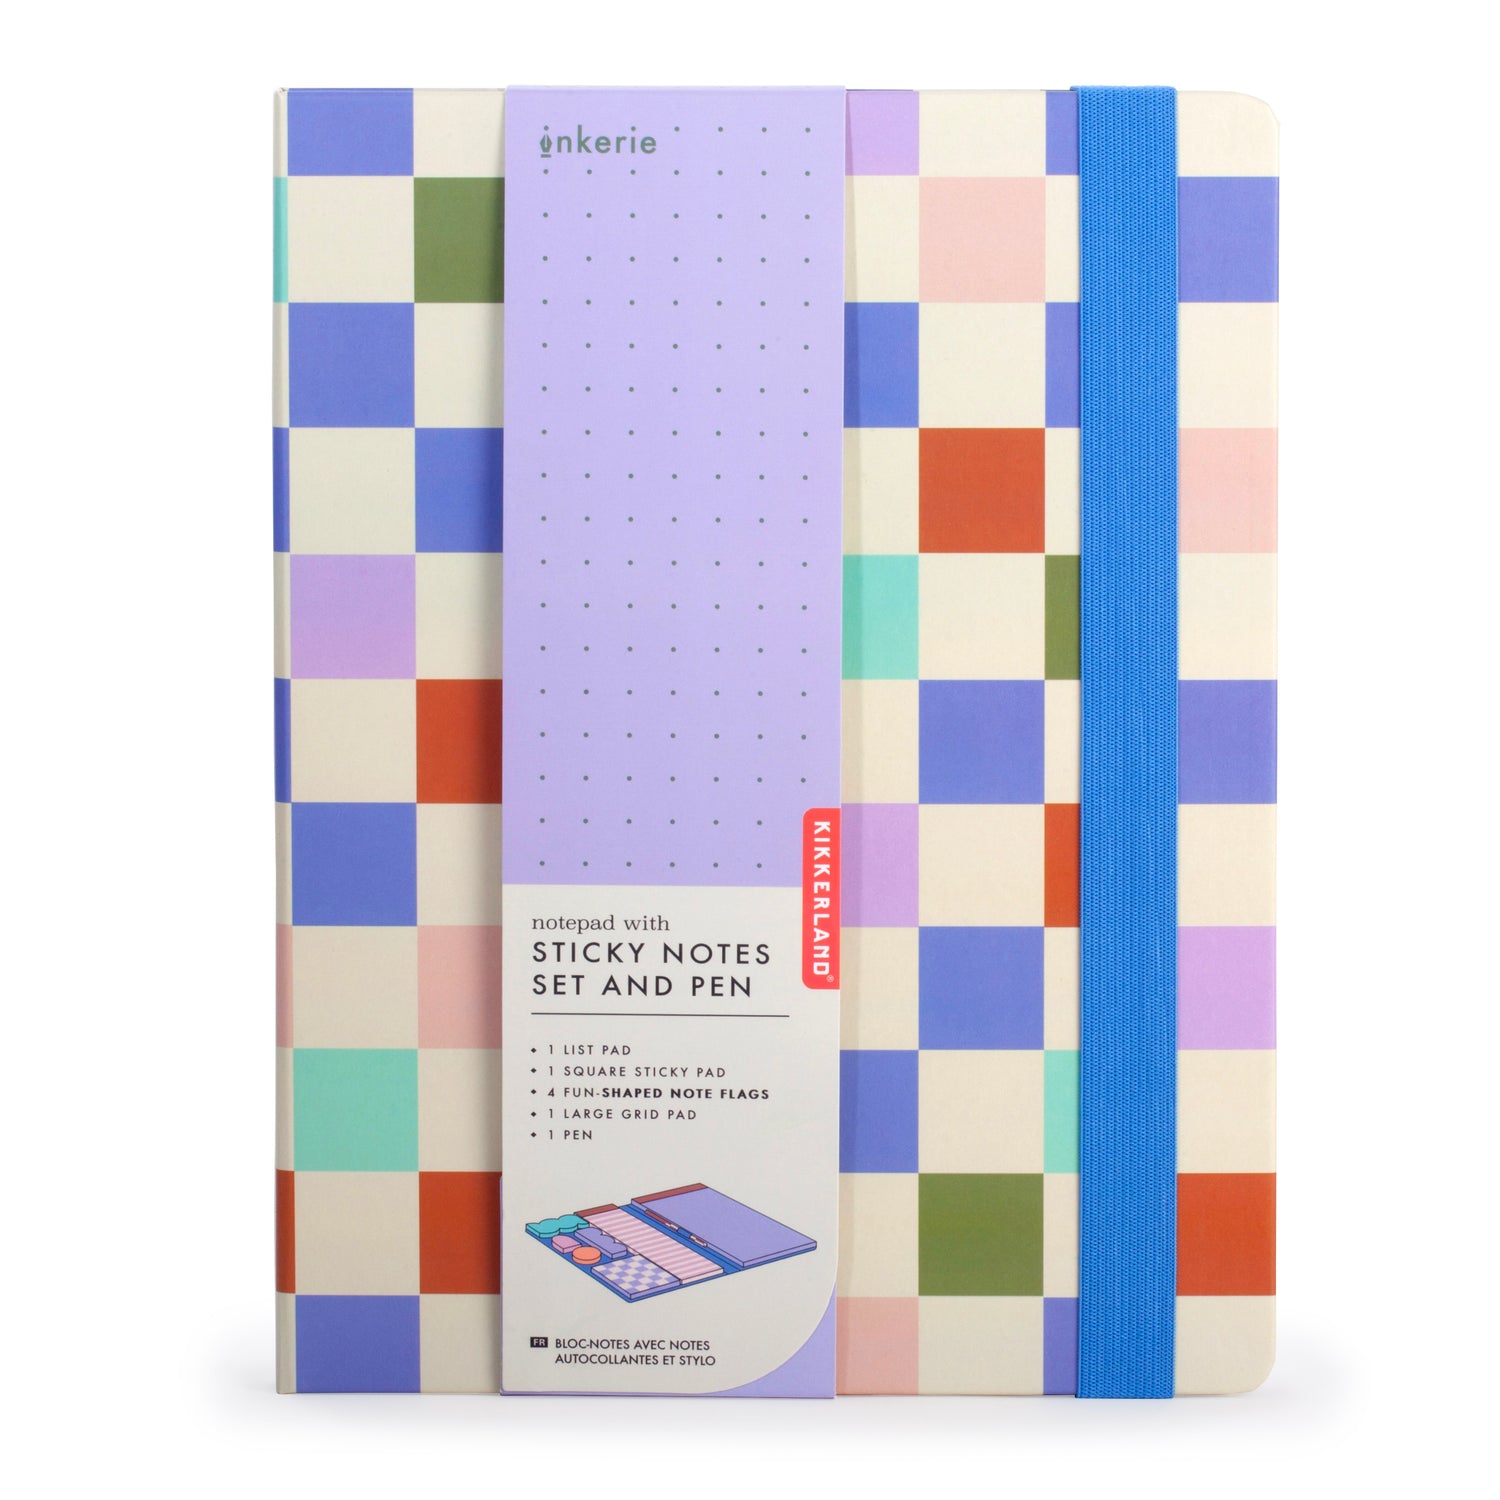 Better Office Products Memo Book - Sticky note set - rainbow - assorted